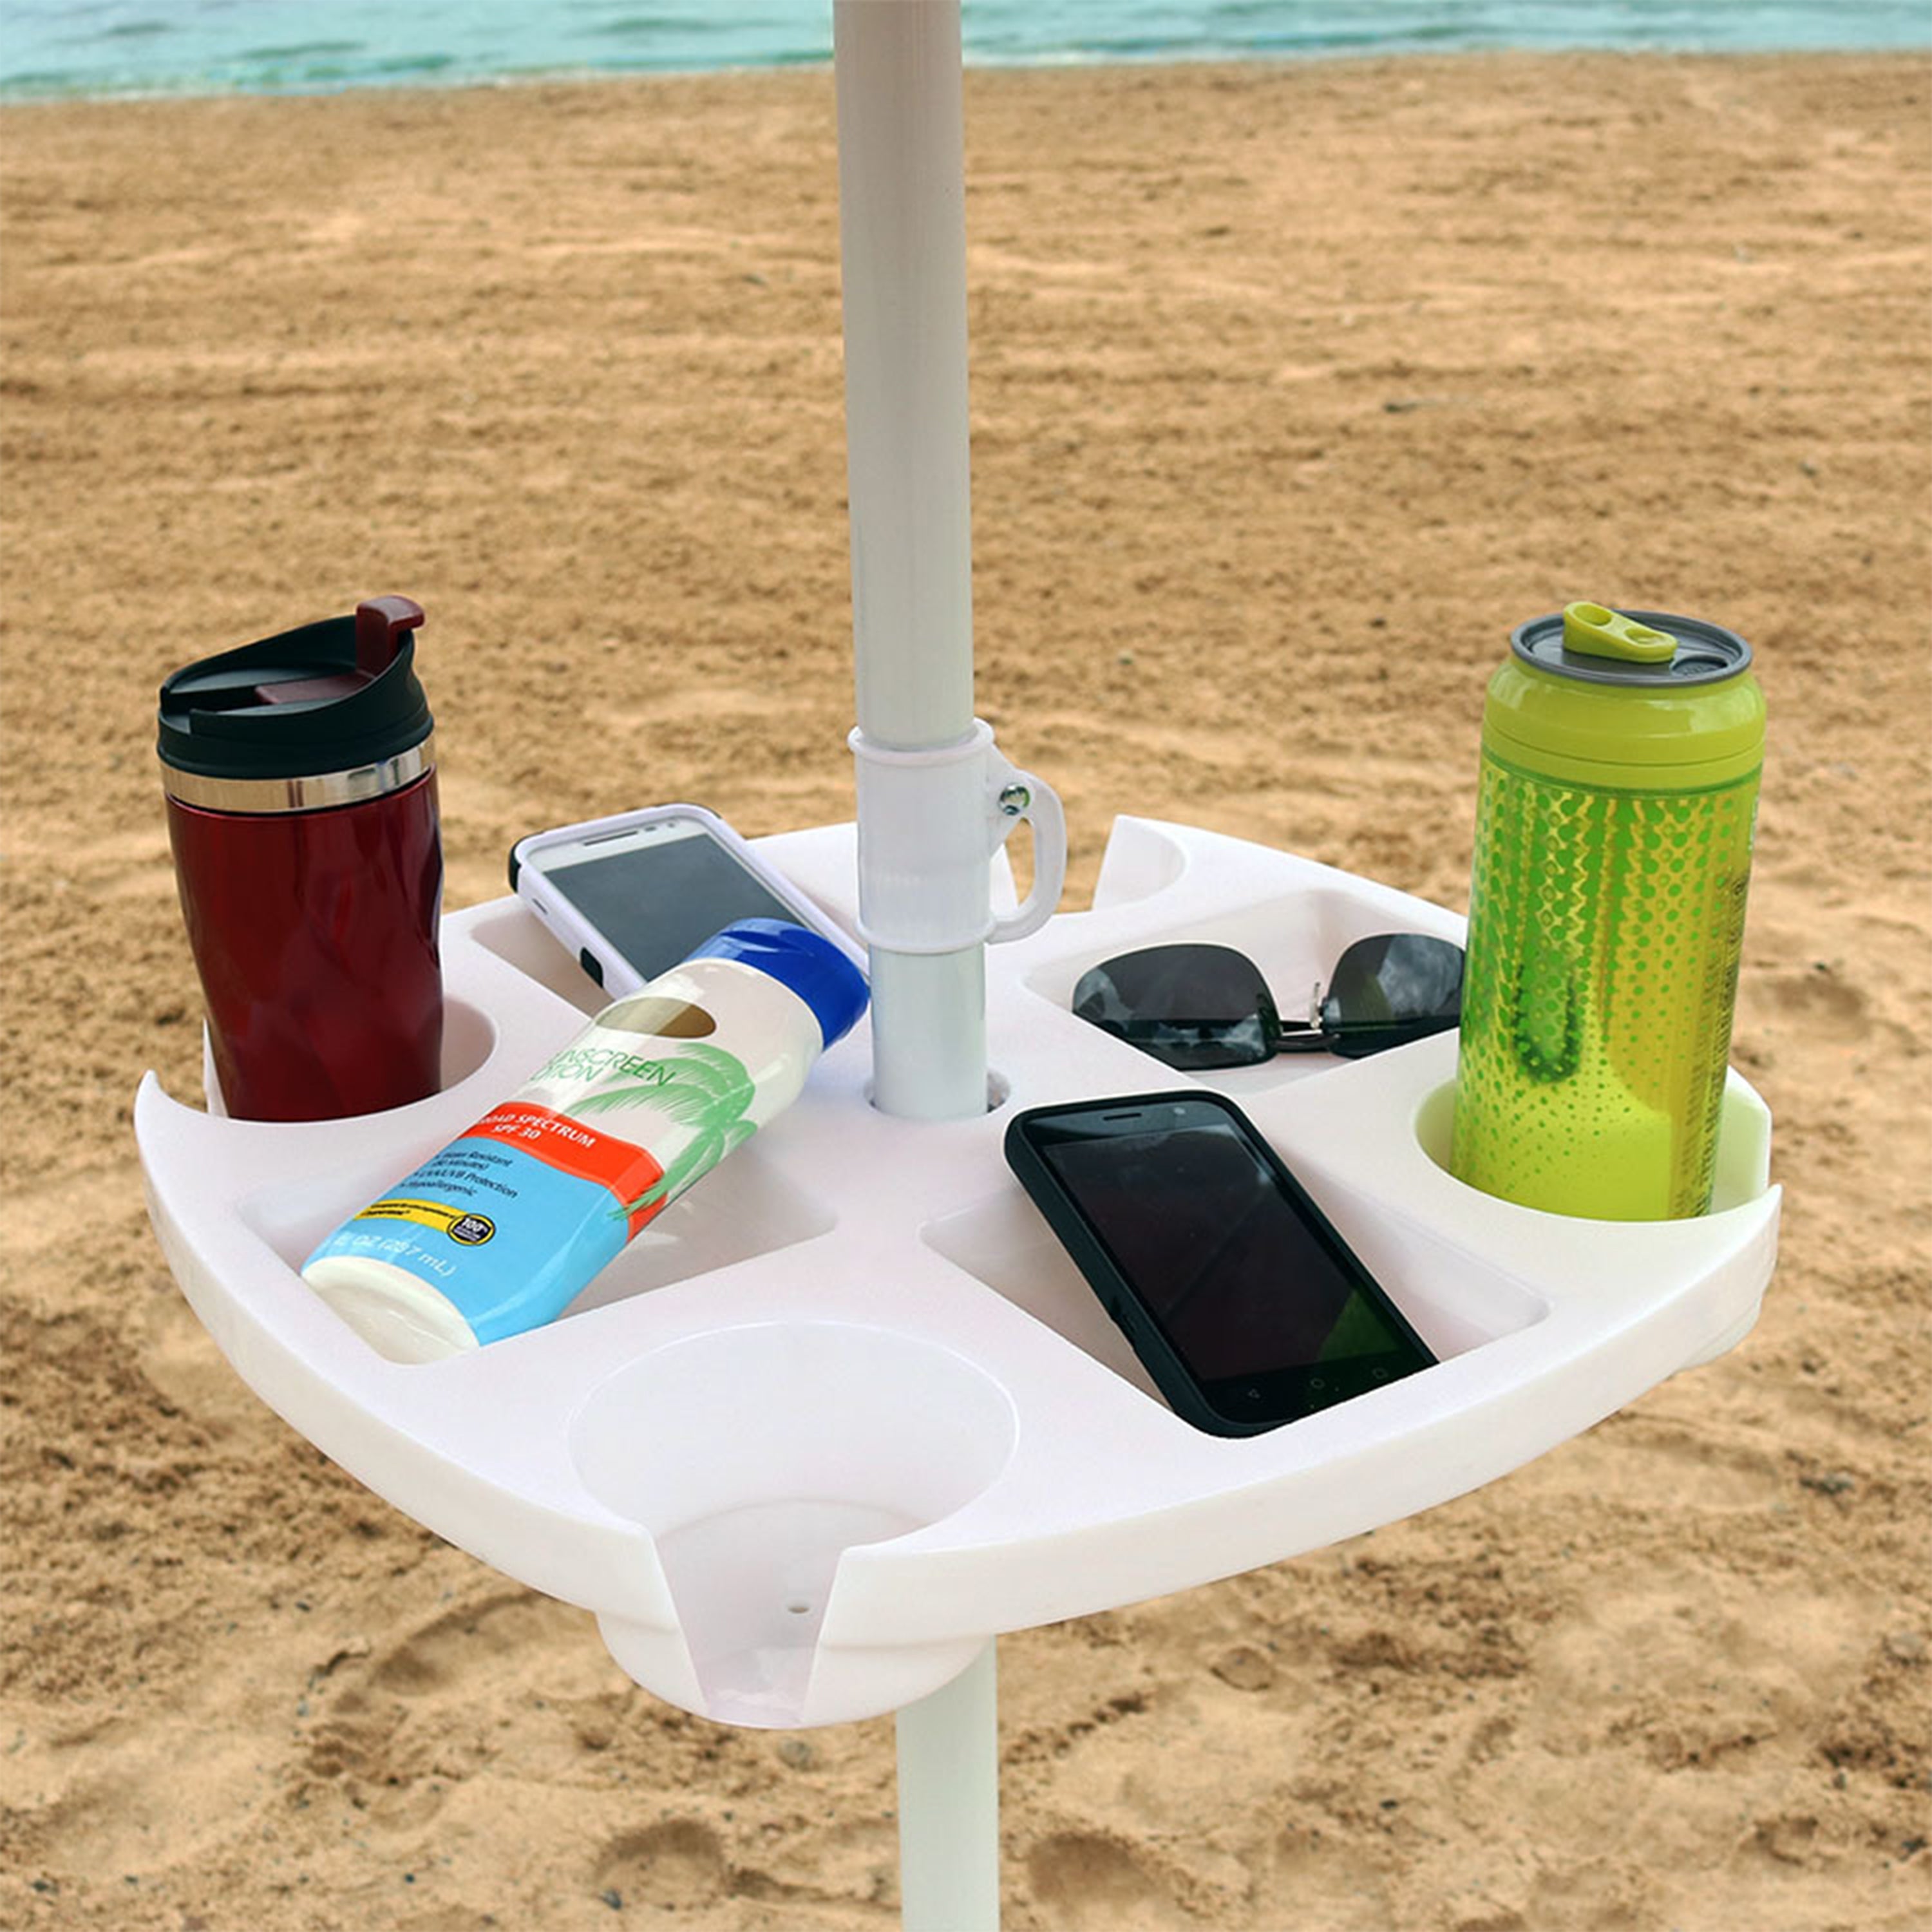 Sunnydaze Outdoor Drink and Snack Table with Tray Slots and 4 Cup Holders for Beach Umbrella Poles - White